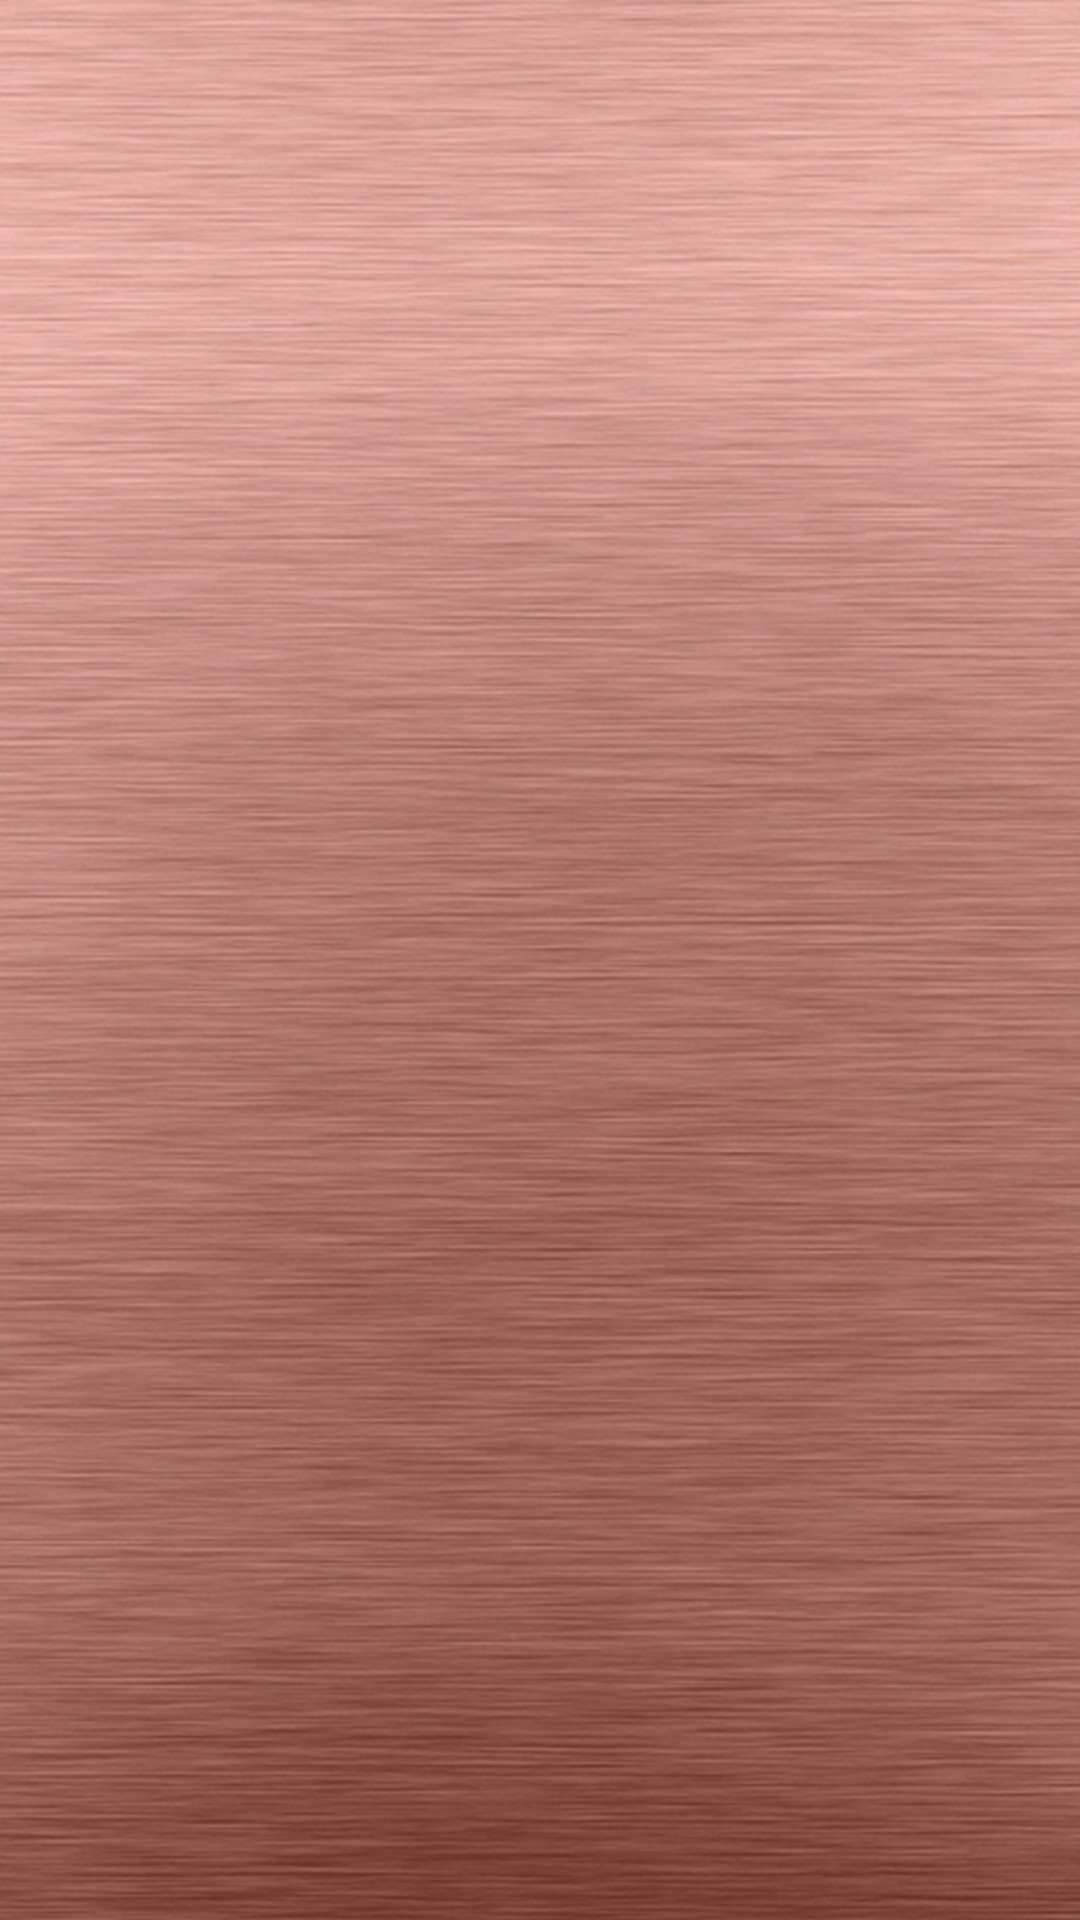 Wallpaper Android Rose Gold with HD resolution 1080x1920